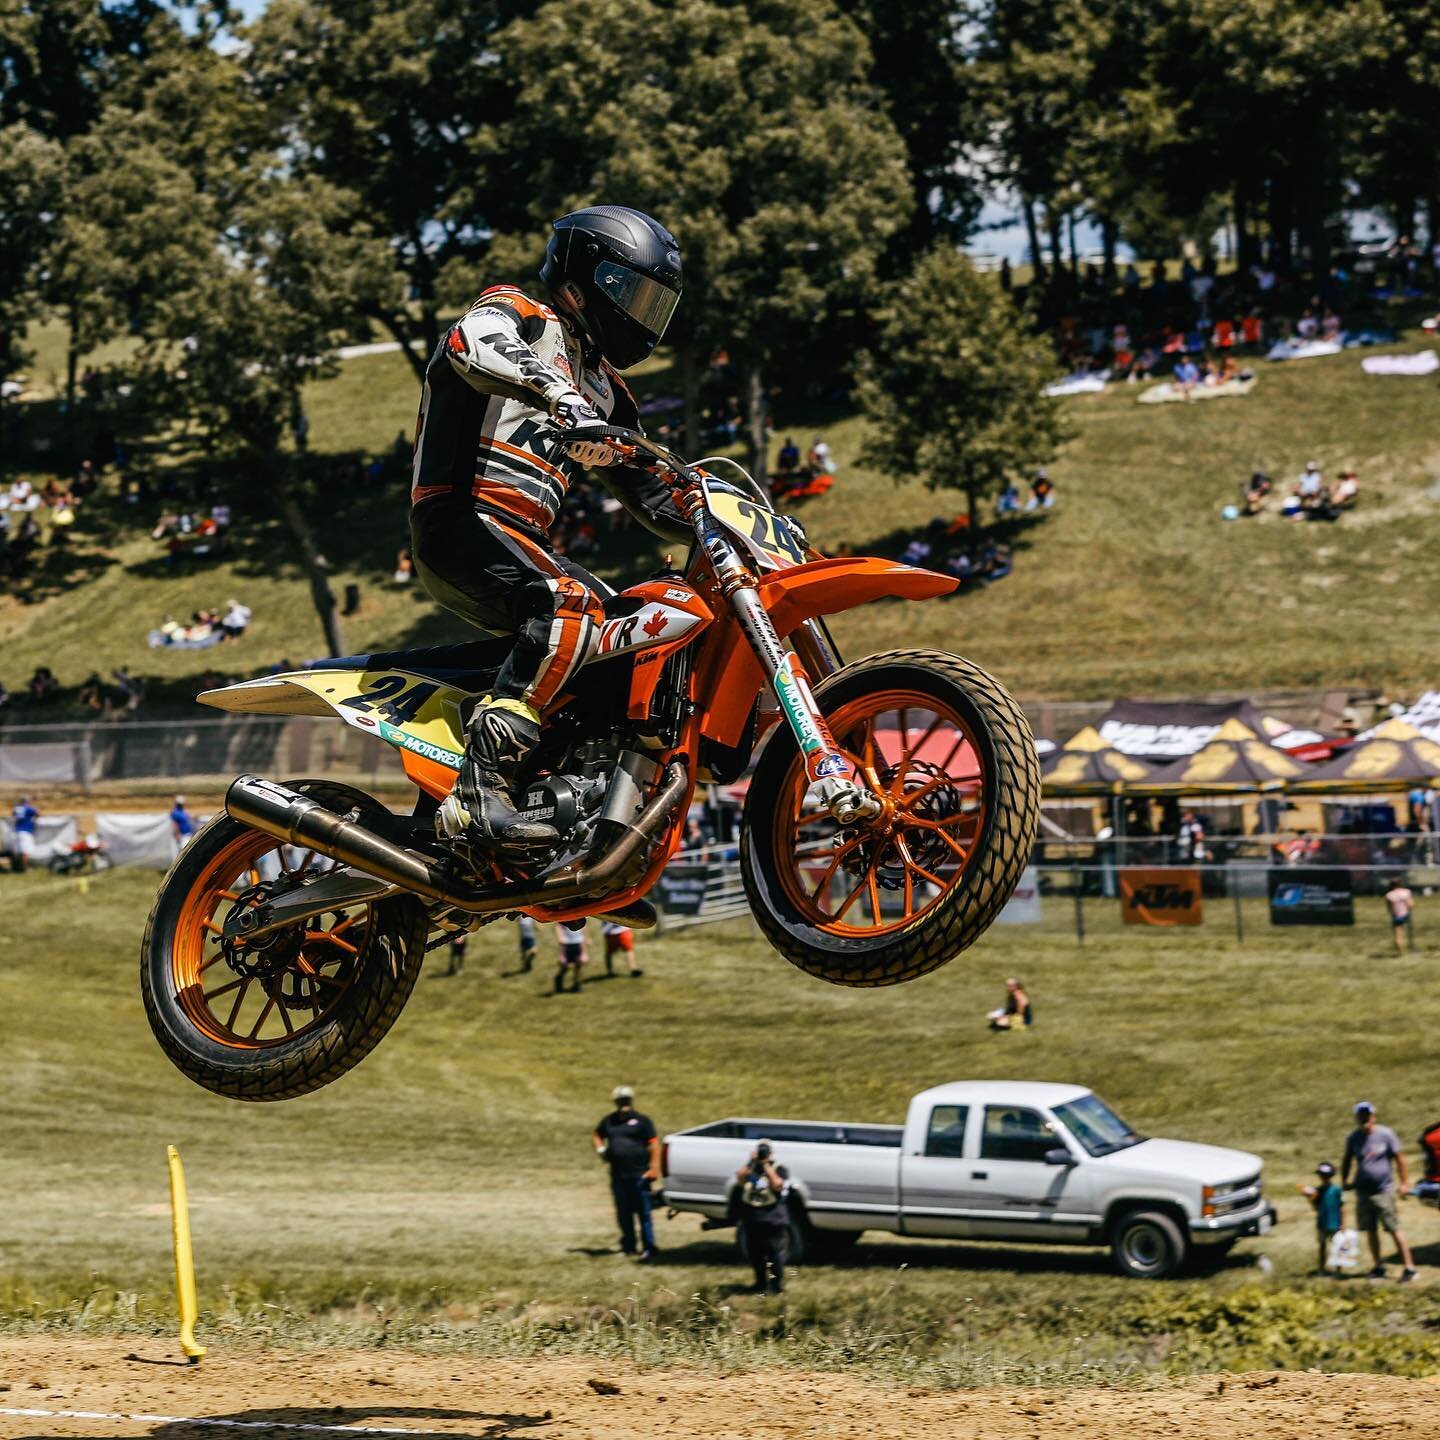 Peoria TT is definitely a tricky one. We had some struggles, missed the main by a transfer spot. Always great vibes there though, no doubt about that. Next @americanflattrack race is Rapid City 1/2 Mile this Saturday 😎

📷: @jennmol_photography 

@k